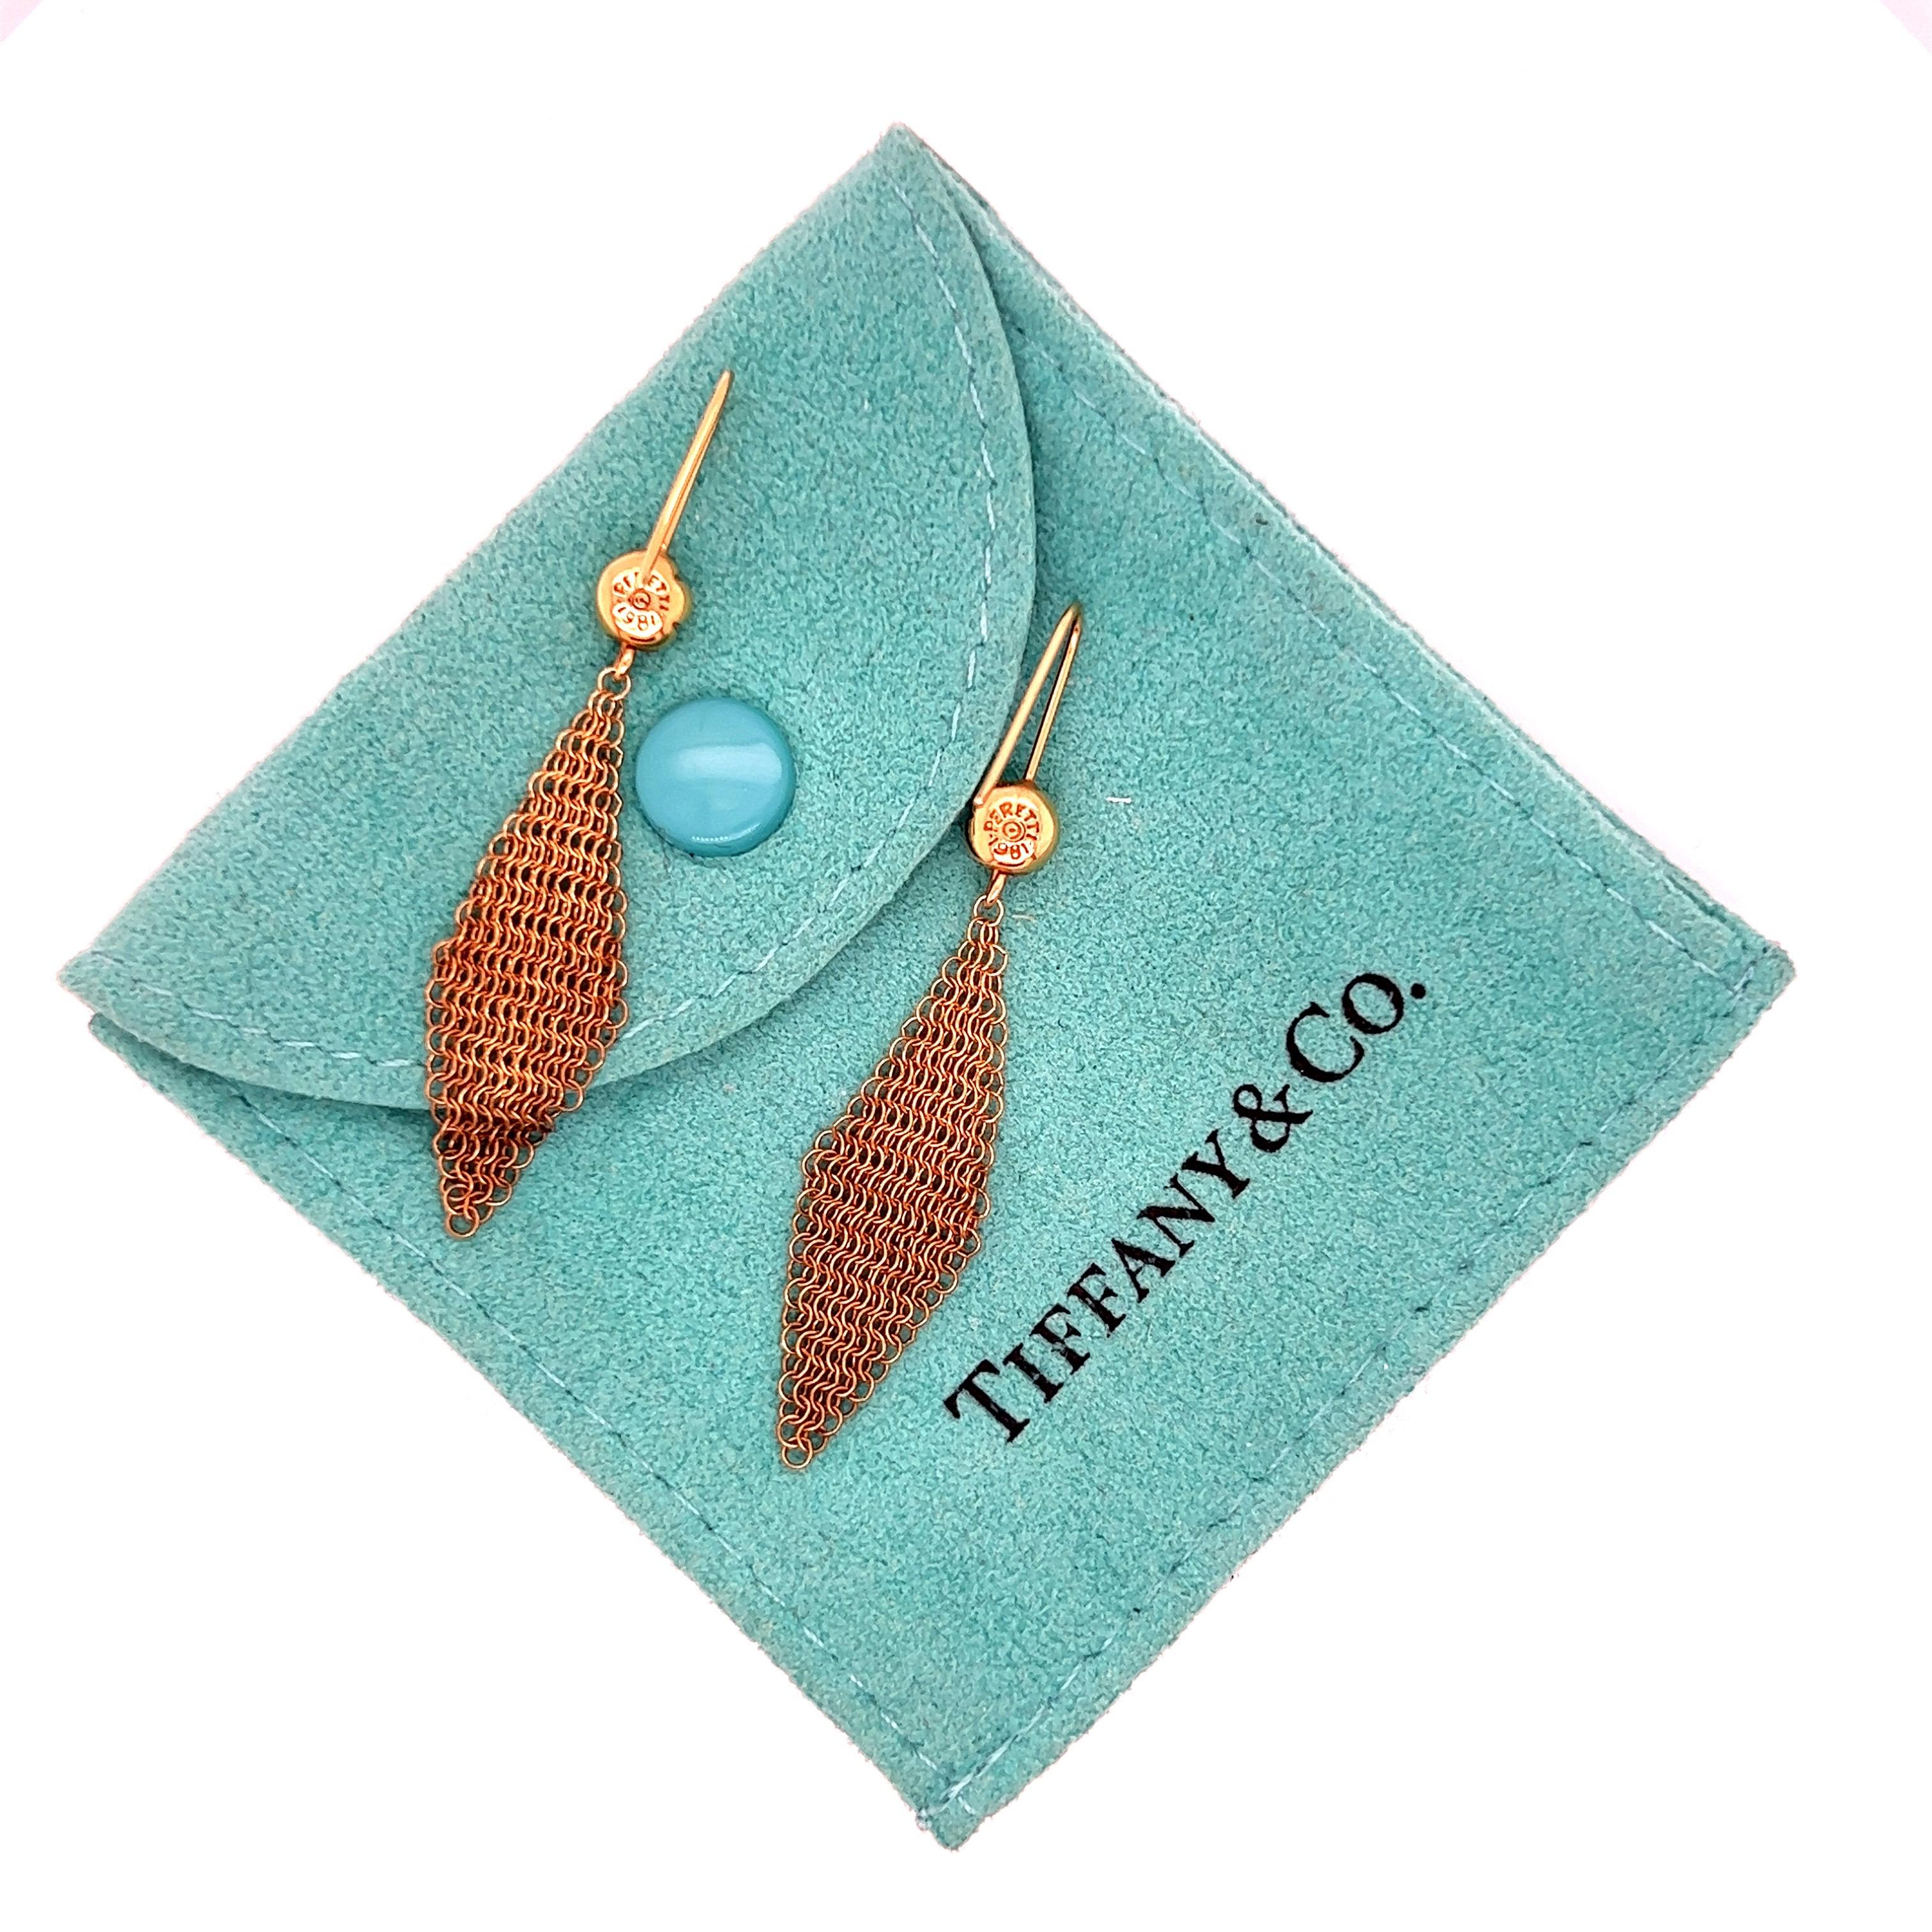 These Tiffany & Co. Elsa Peretti mesh dangle drop earrings are finely crafted in 18 karat yellow gold. The earrings are 5 cm long from the hook fastening to the drop. 

Additional information:
Style : Dangle/Drop
Metal Type : 18Kt Gold
Metal Weight